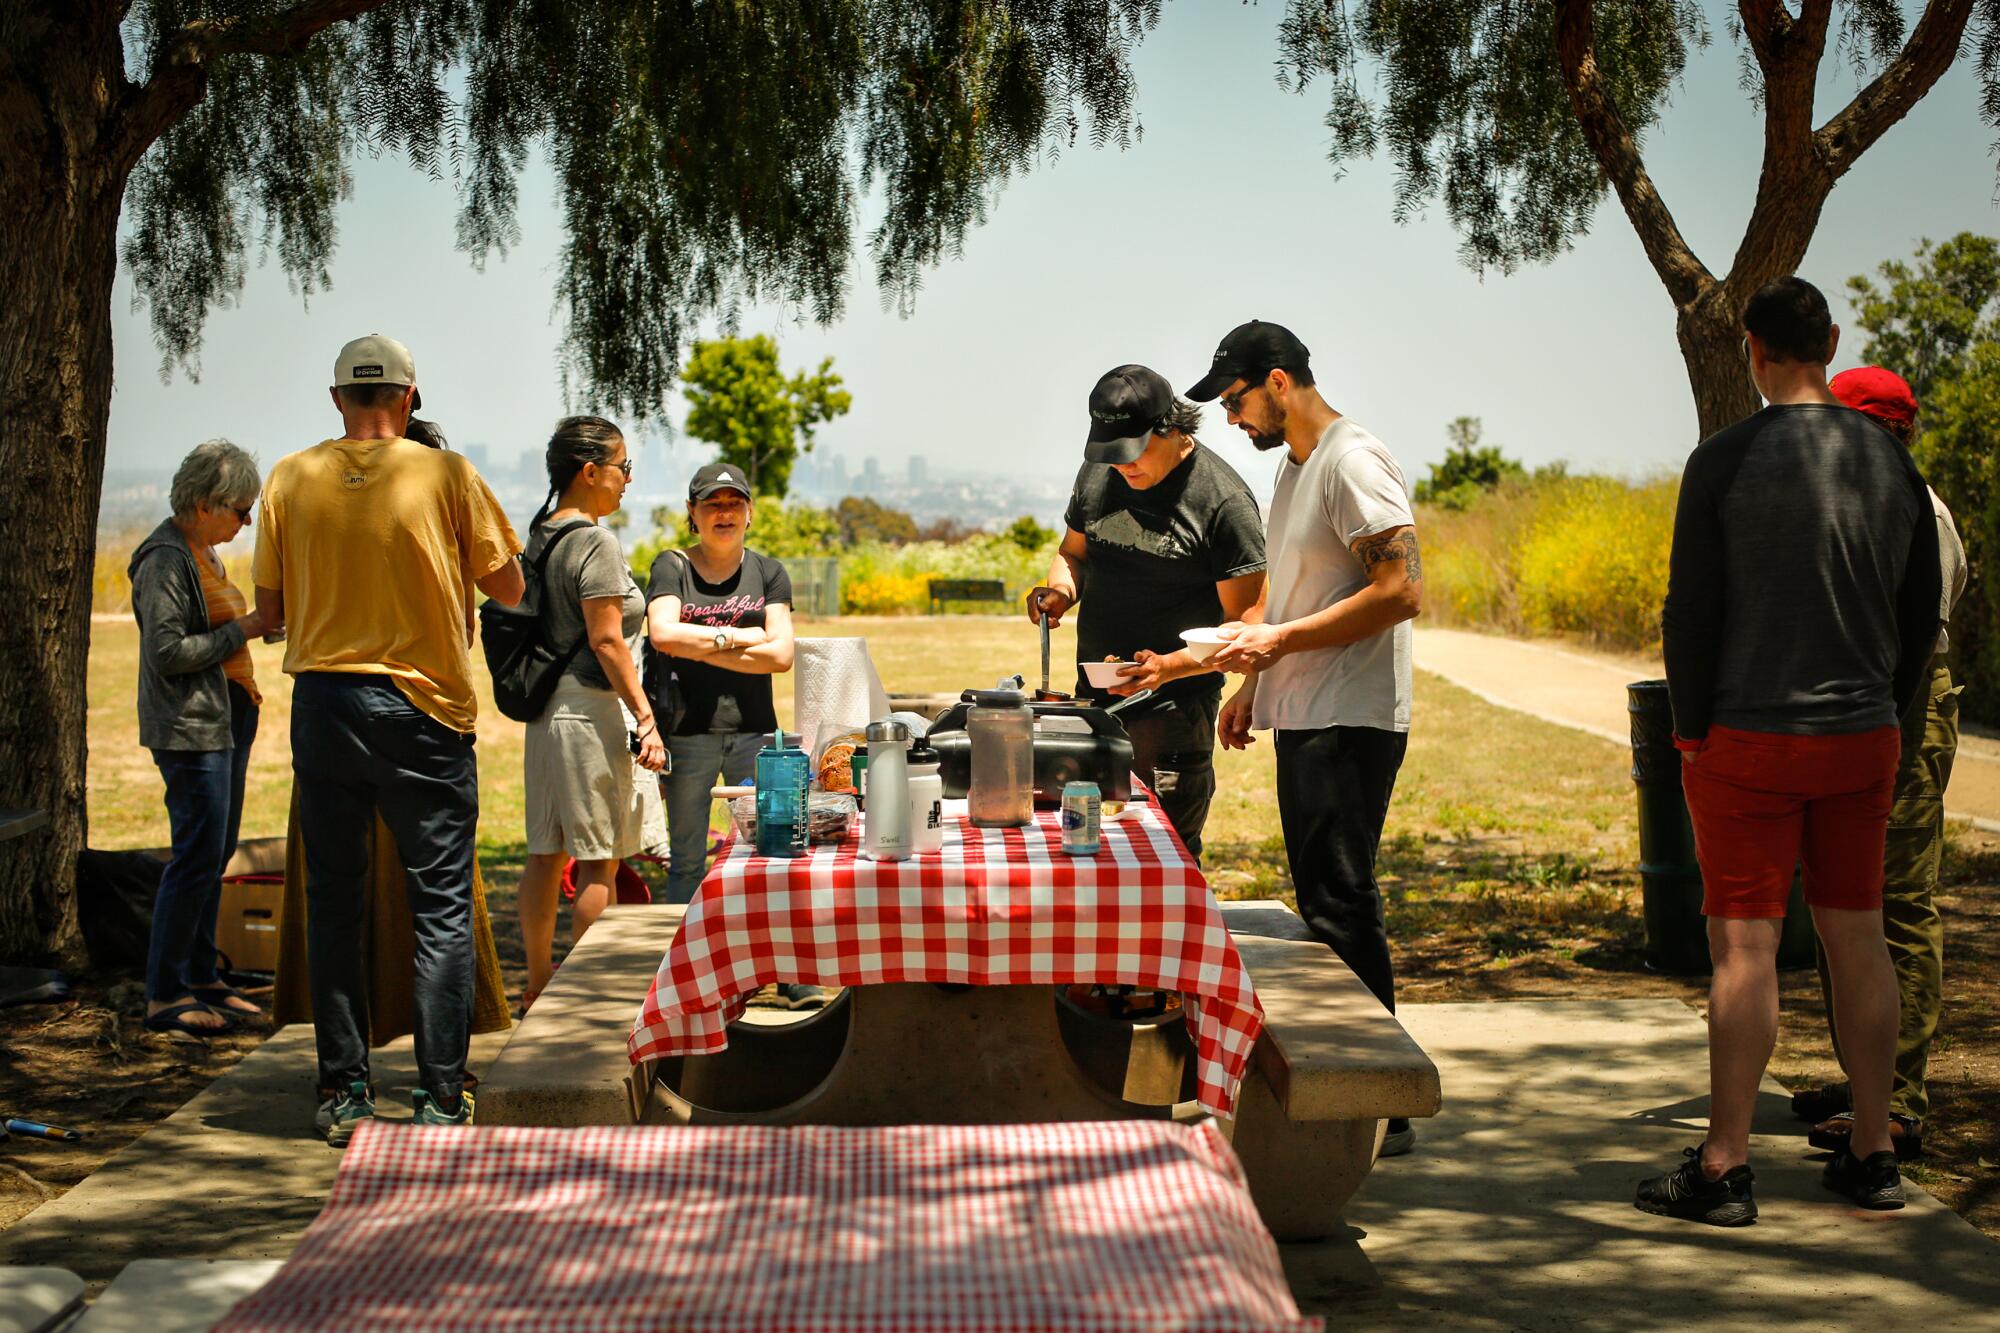 People mill about a picnic table covered with a red-checkered tablecloth.